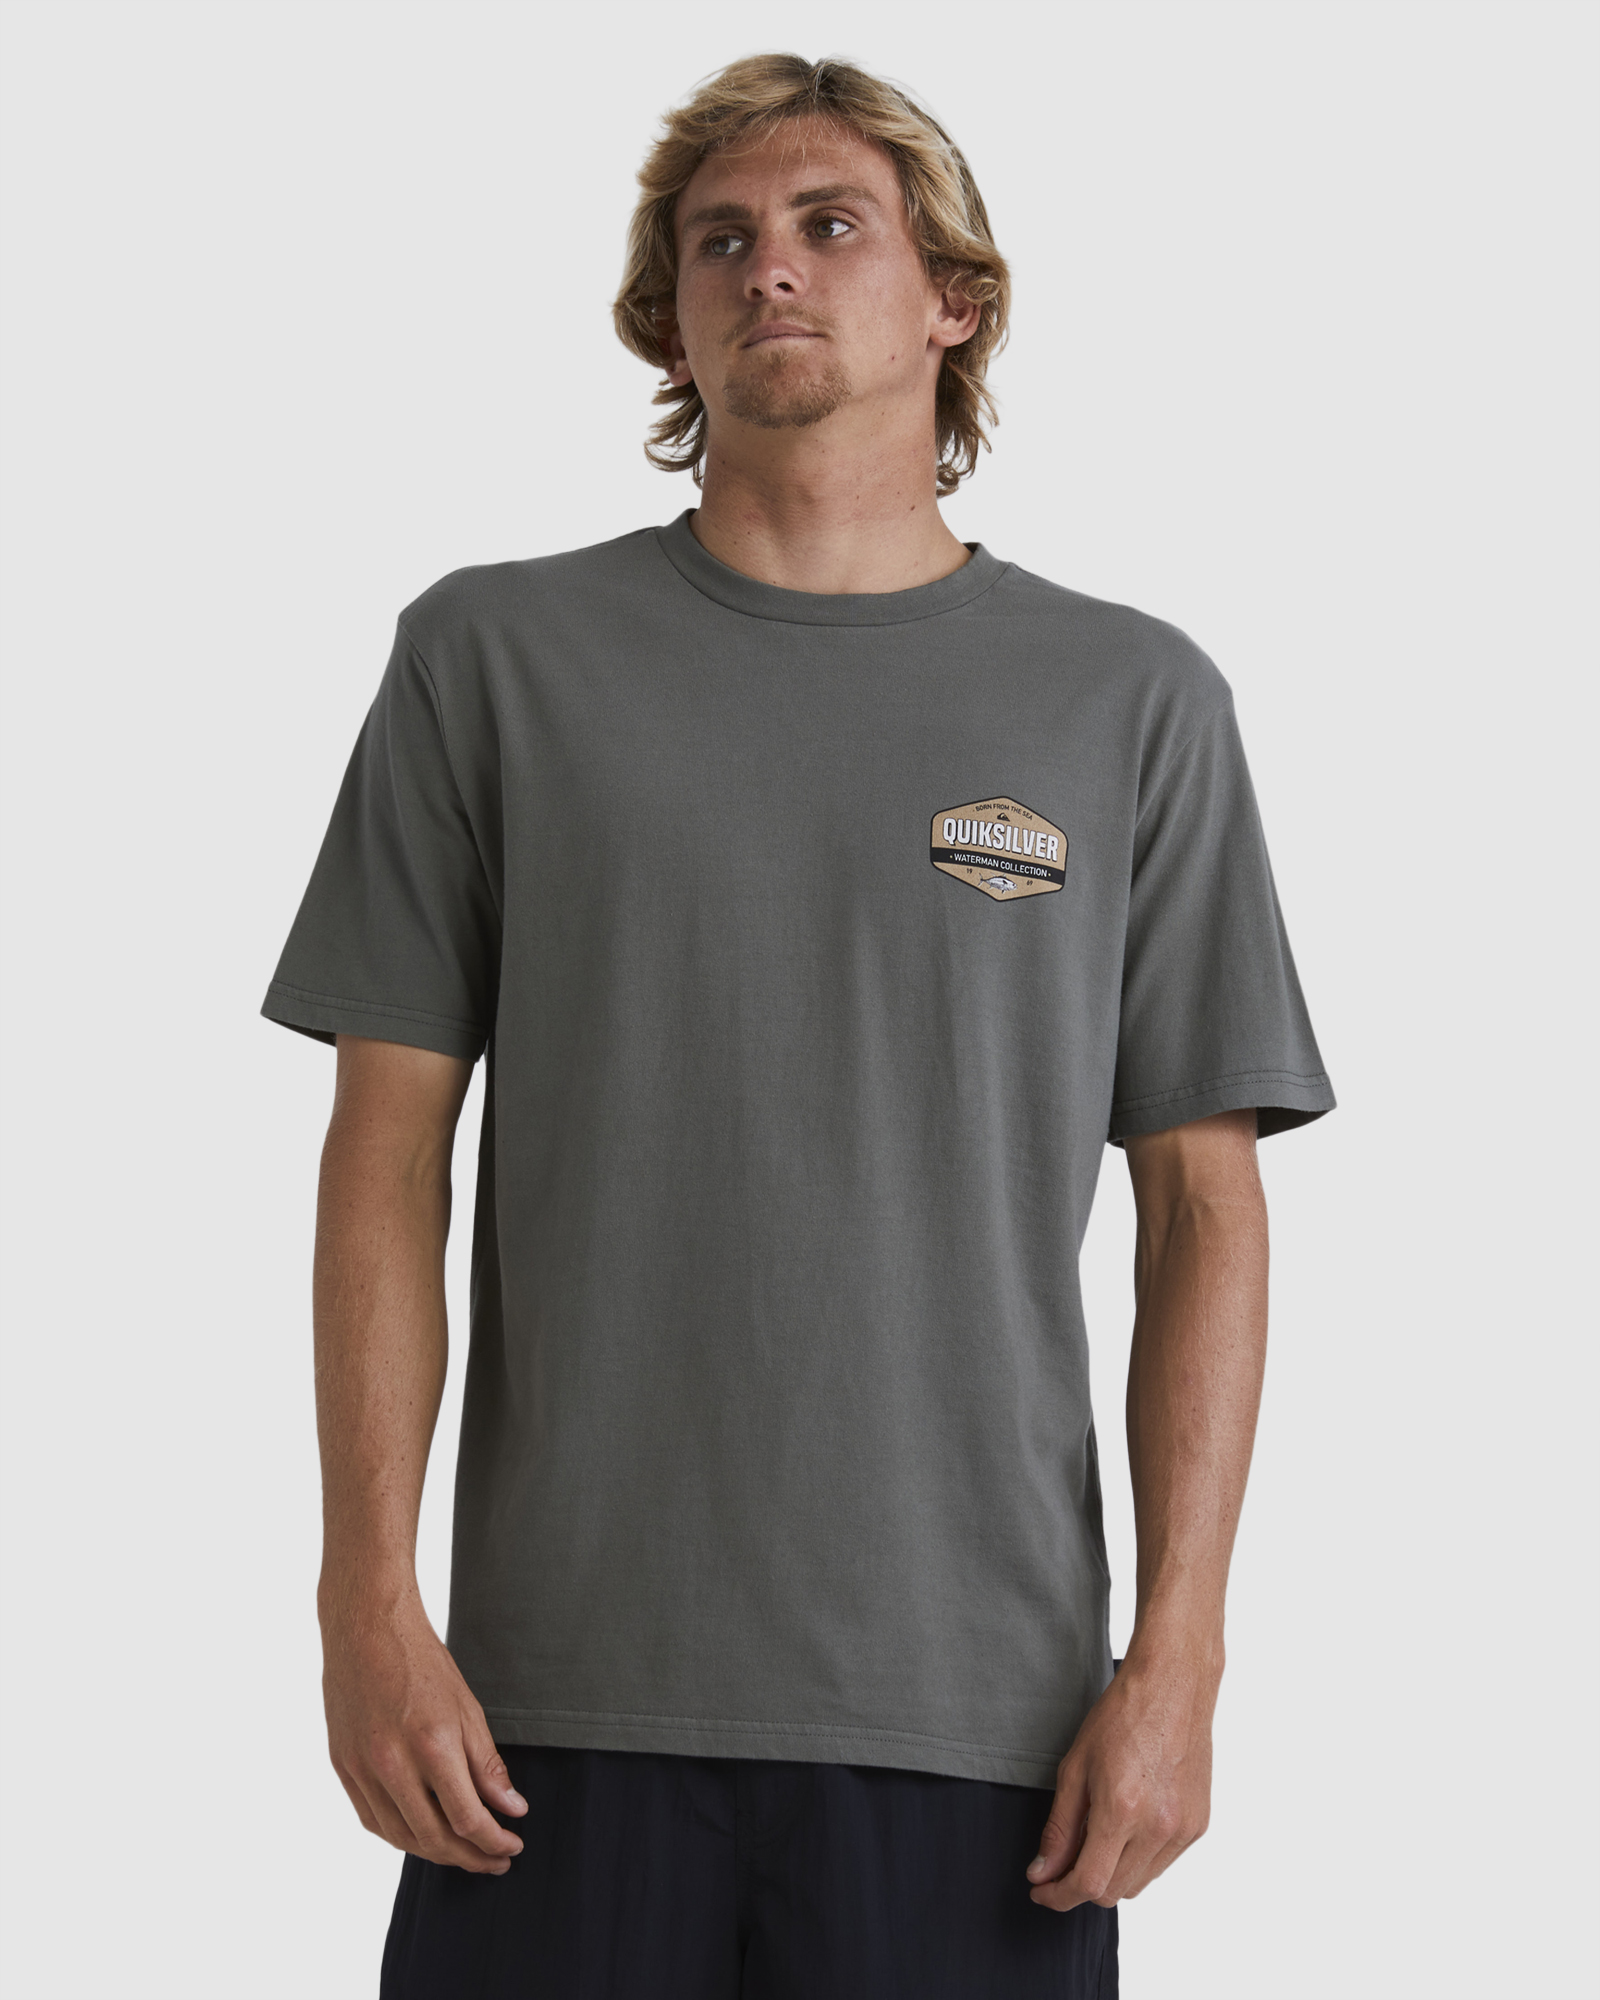 Quiksilver Mens Morning Session Tee - Dusty Olive | SurfStitch